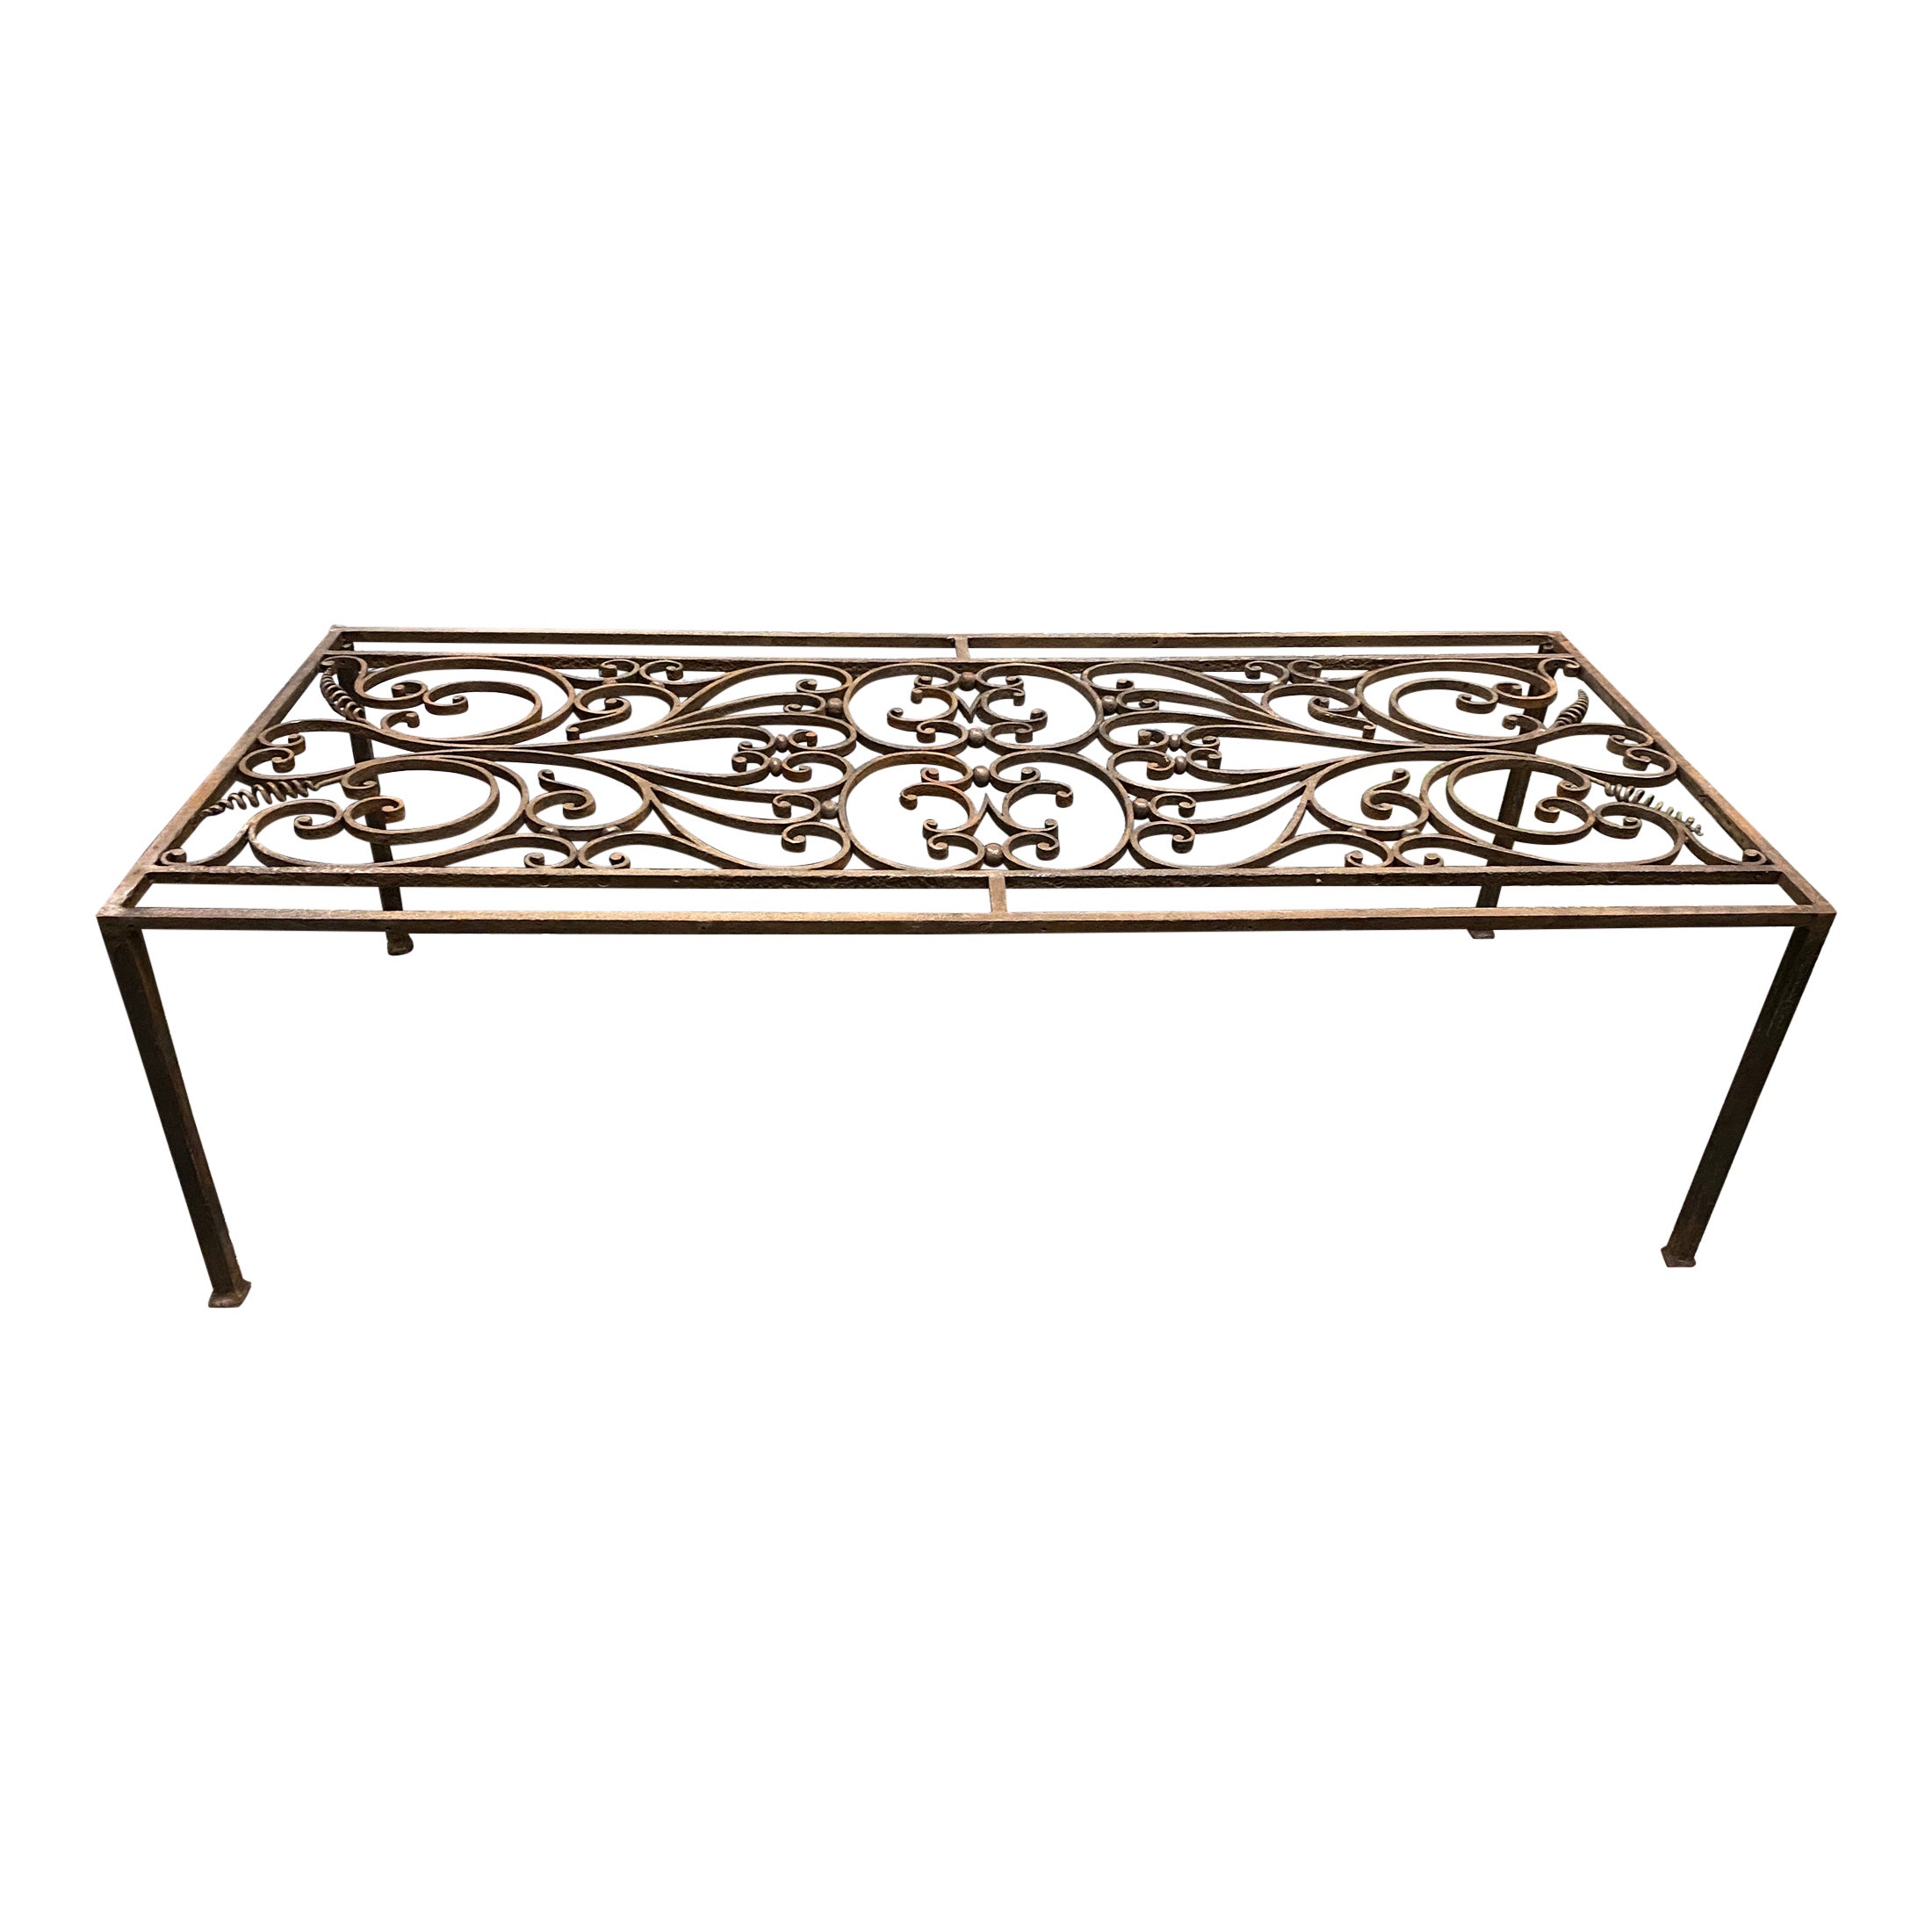 French Iron Architectural Fragment Coffee Table Frame For Sale